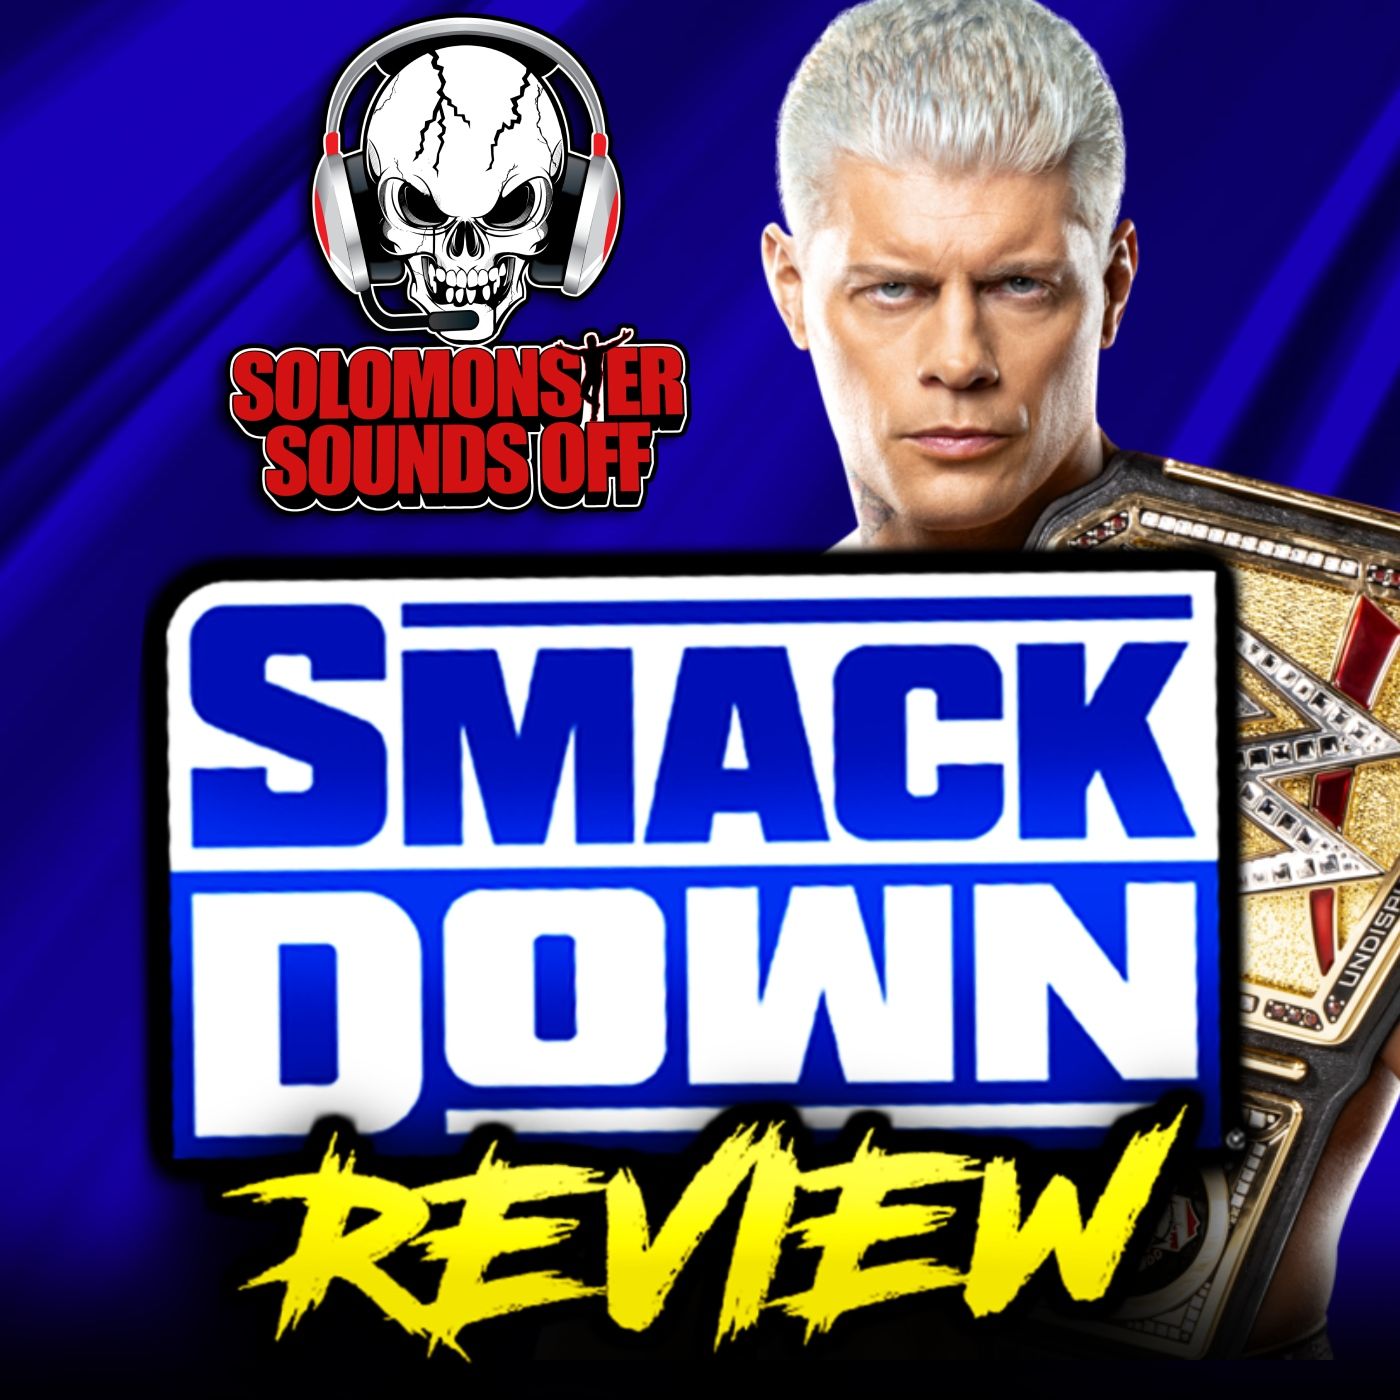 WWE Smackdown 5/3/24 Review - HOLY CRAP, IF ONLY THESE CROWDS COULD BE LIKE THIS EVERY WEEK